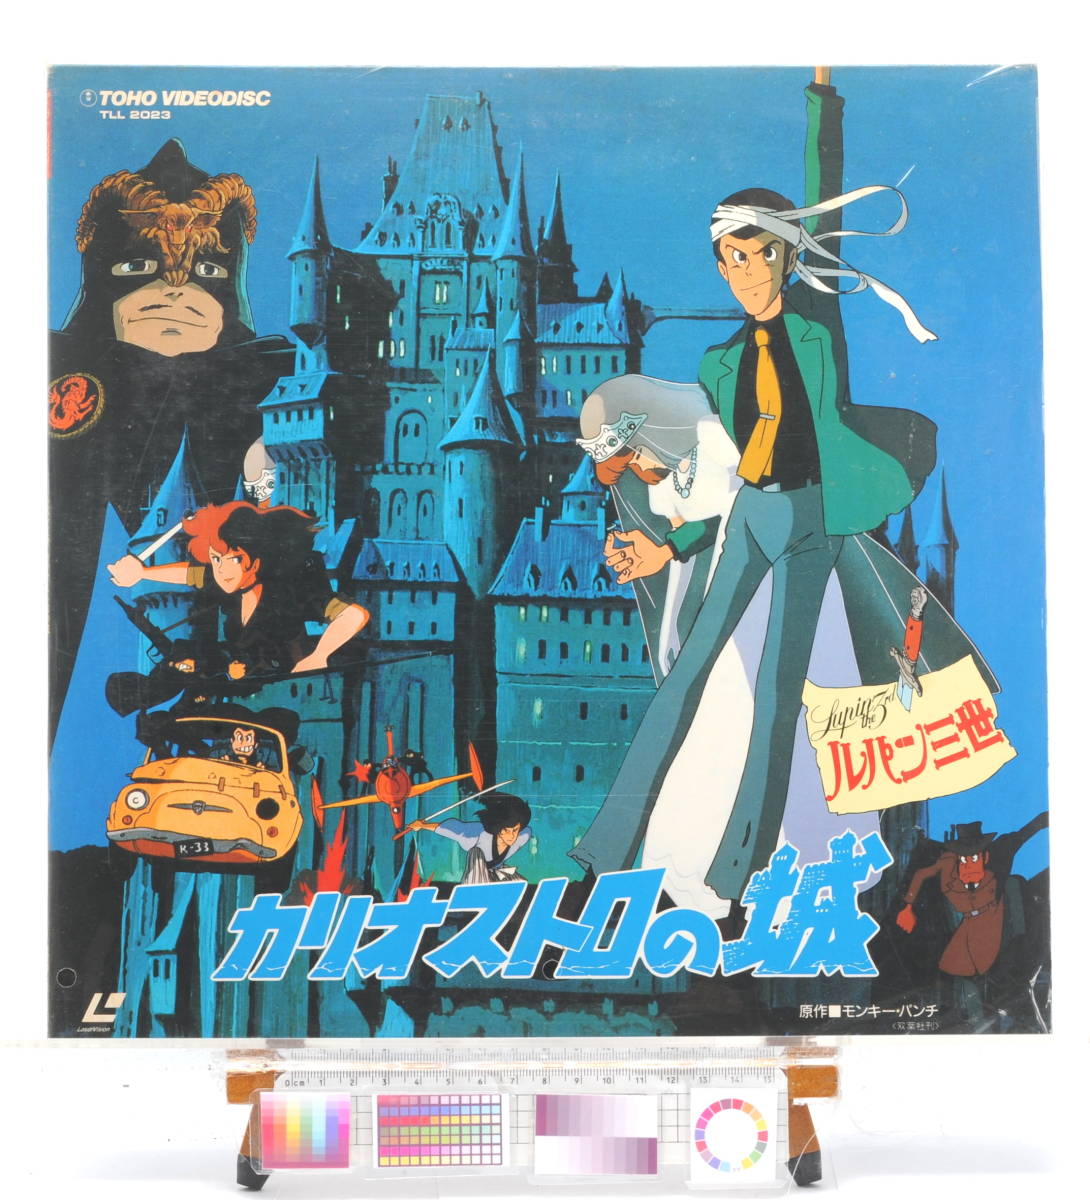 [Delivery Free]1979 LUPIN THE 3rd THE CASTLE OF CAGLIOSTRO LaserDisc,Jacket[Bonus:LD SOFT]ルパン三世 カリオストロの城[tagLD]